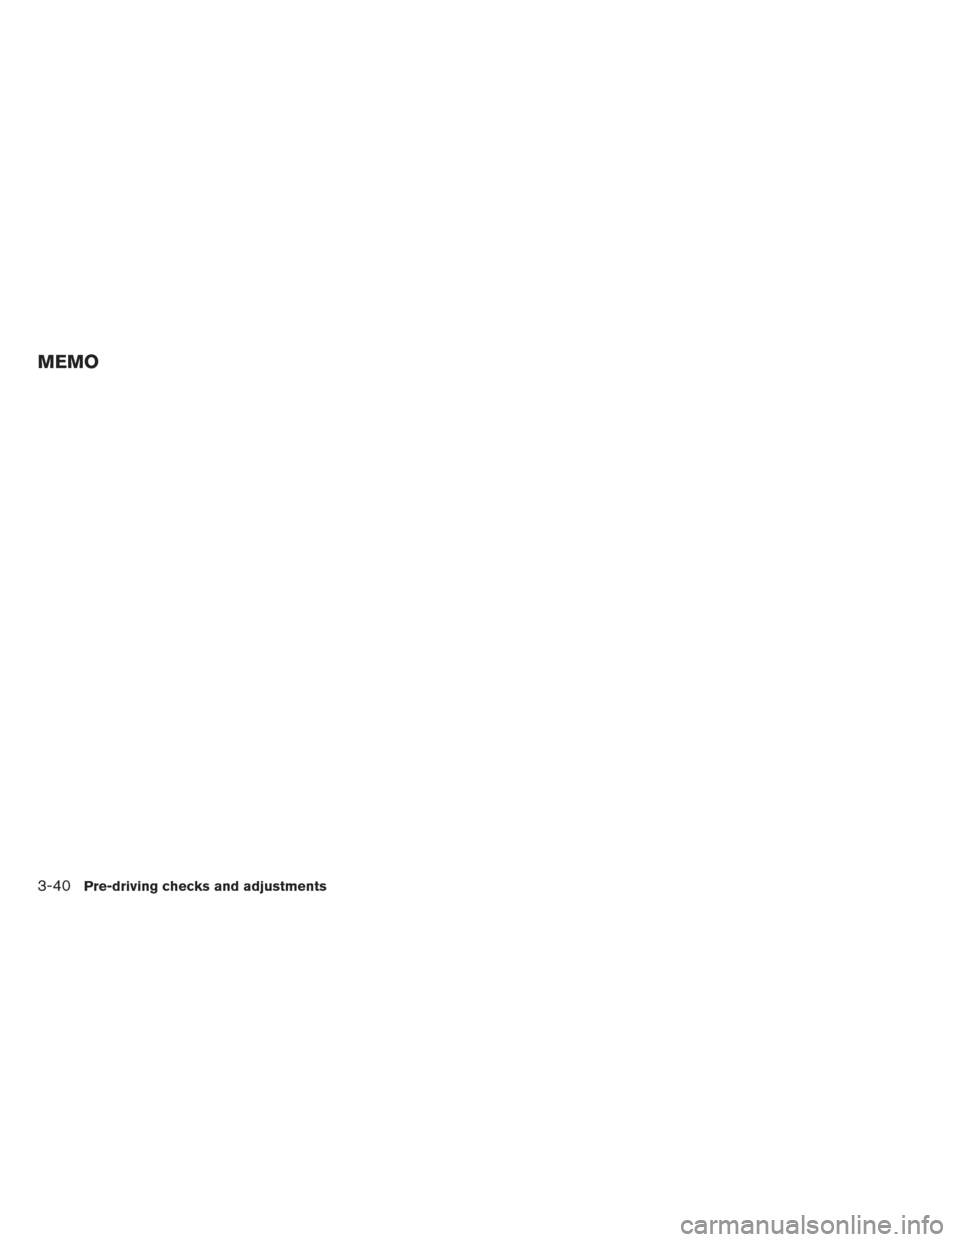 NISSAN PATHFINDER 2013 R52 / 4.G Owners Manual MEMO
3-40Pre-driving checks and adjustments 